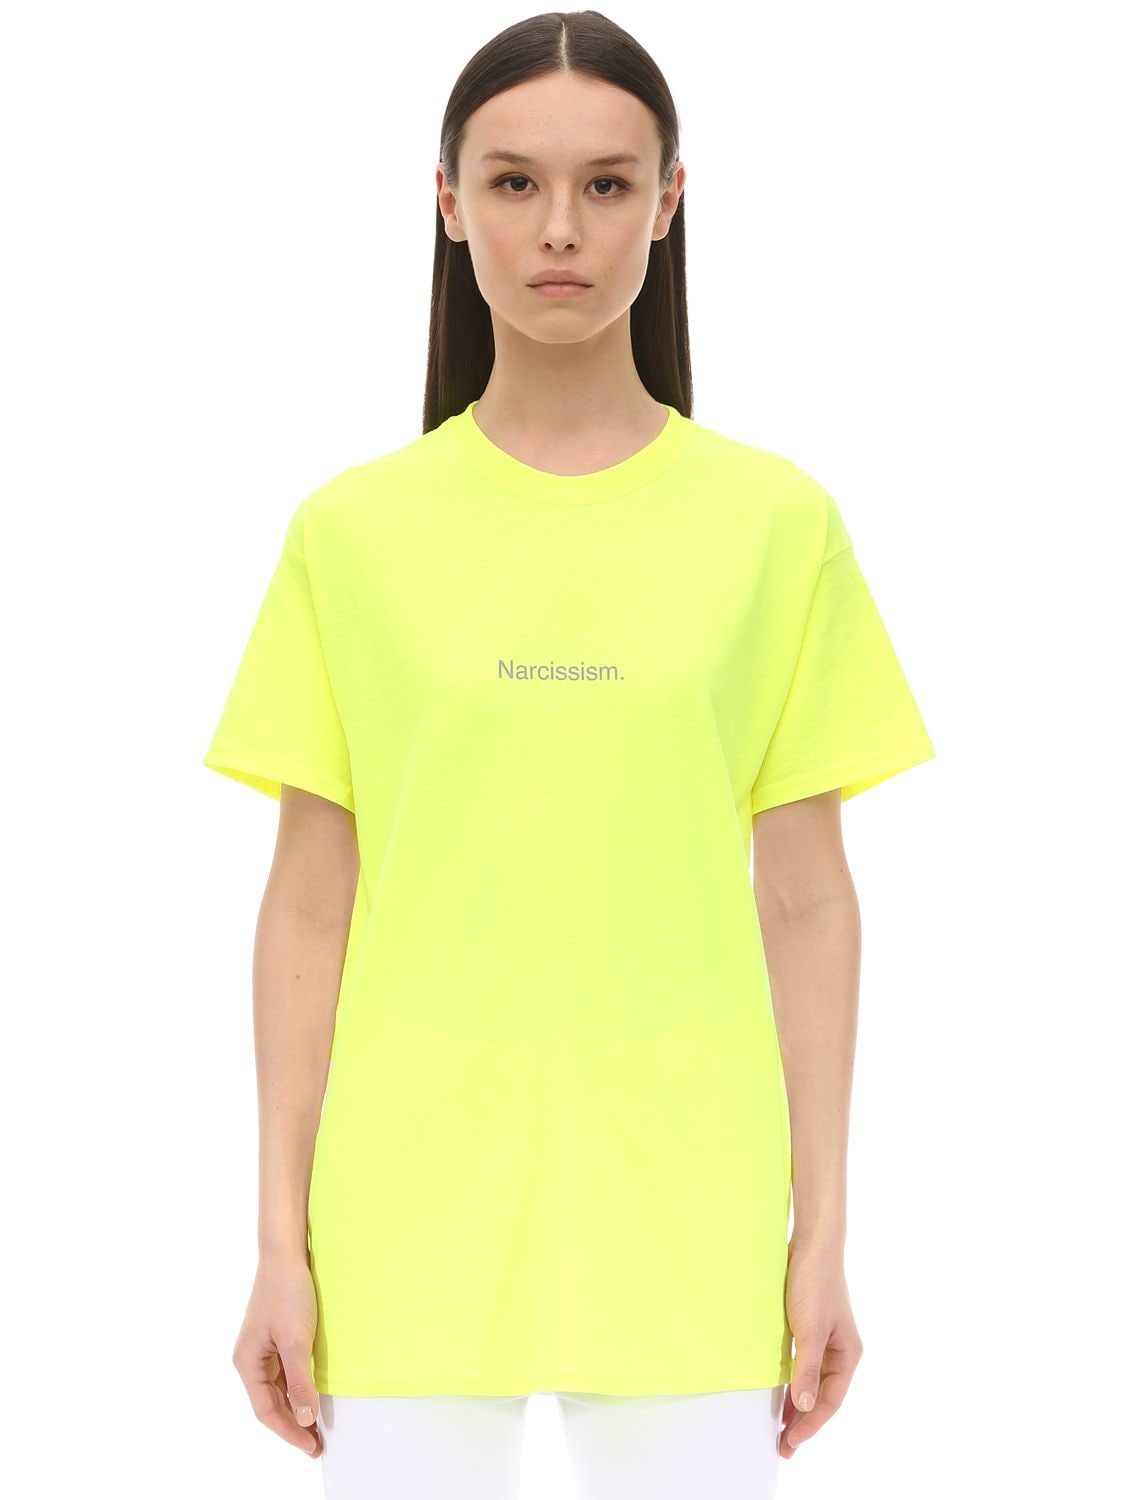 Famt - Fuck Art Make Tees Narcissism Cotton Jersey T-shirt In Neon Yellow